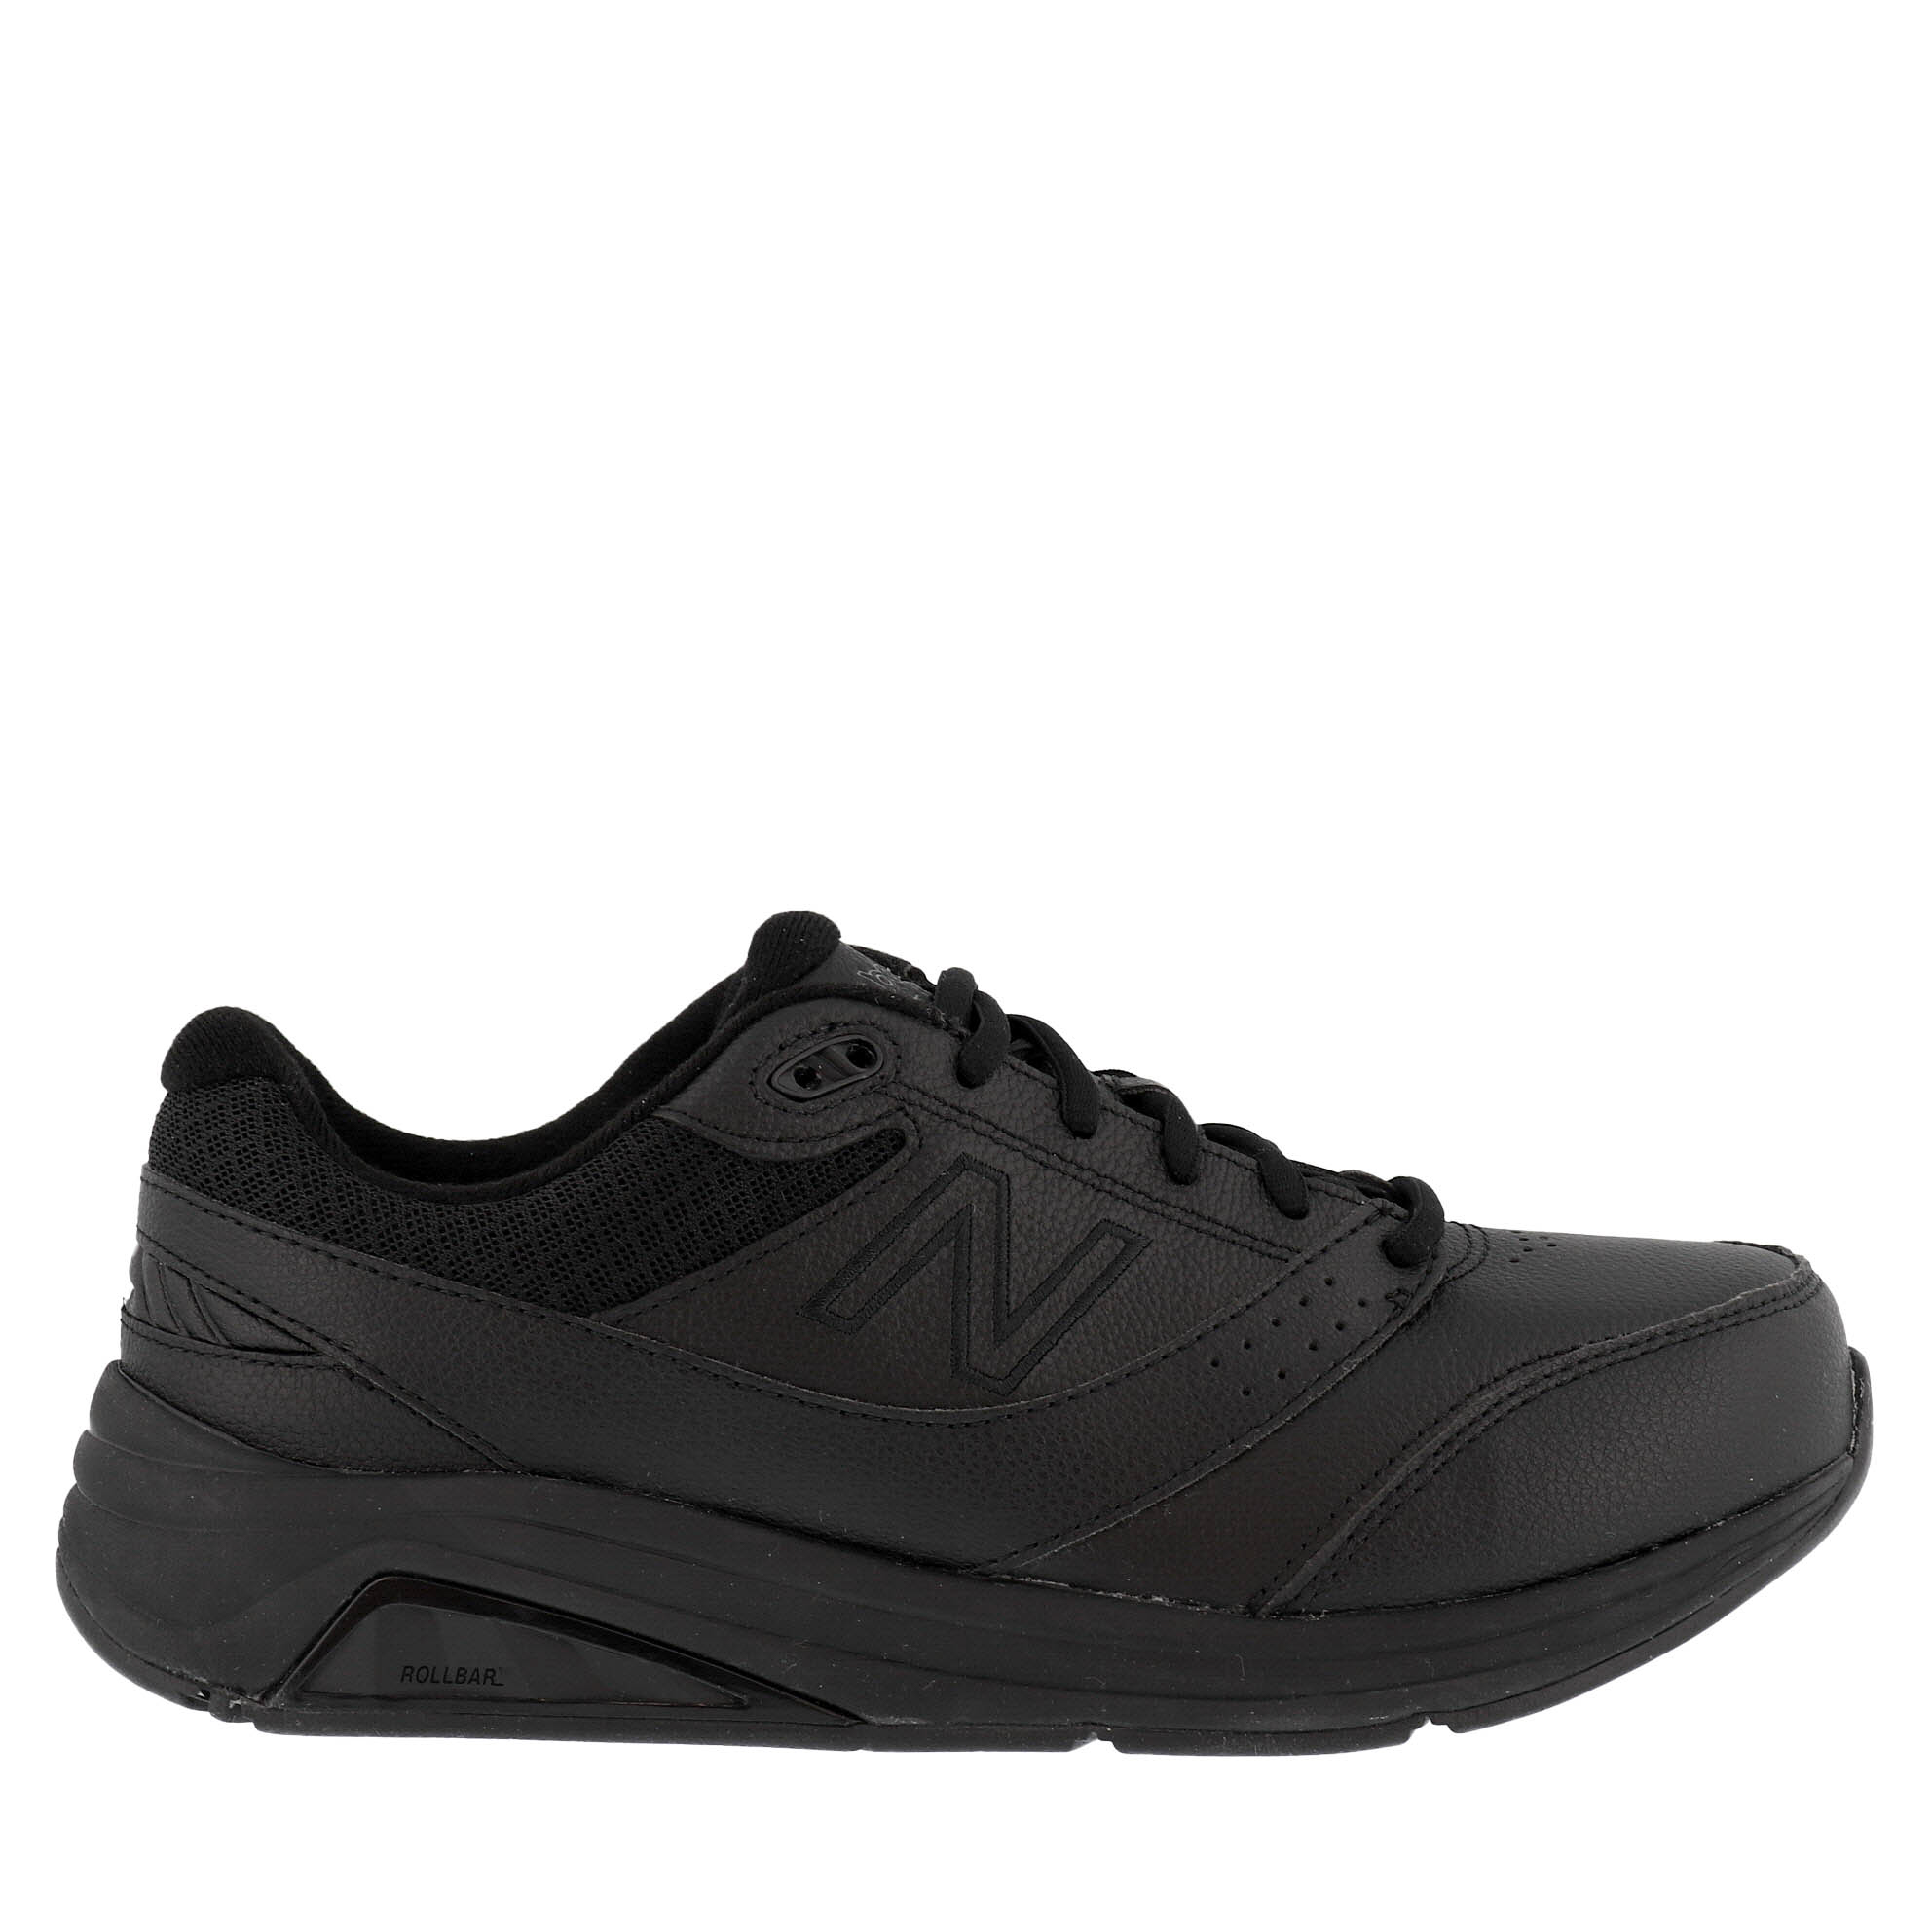 New balance with rollbar, Shoes + FREE SHIPPING | Zappos.com